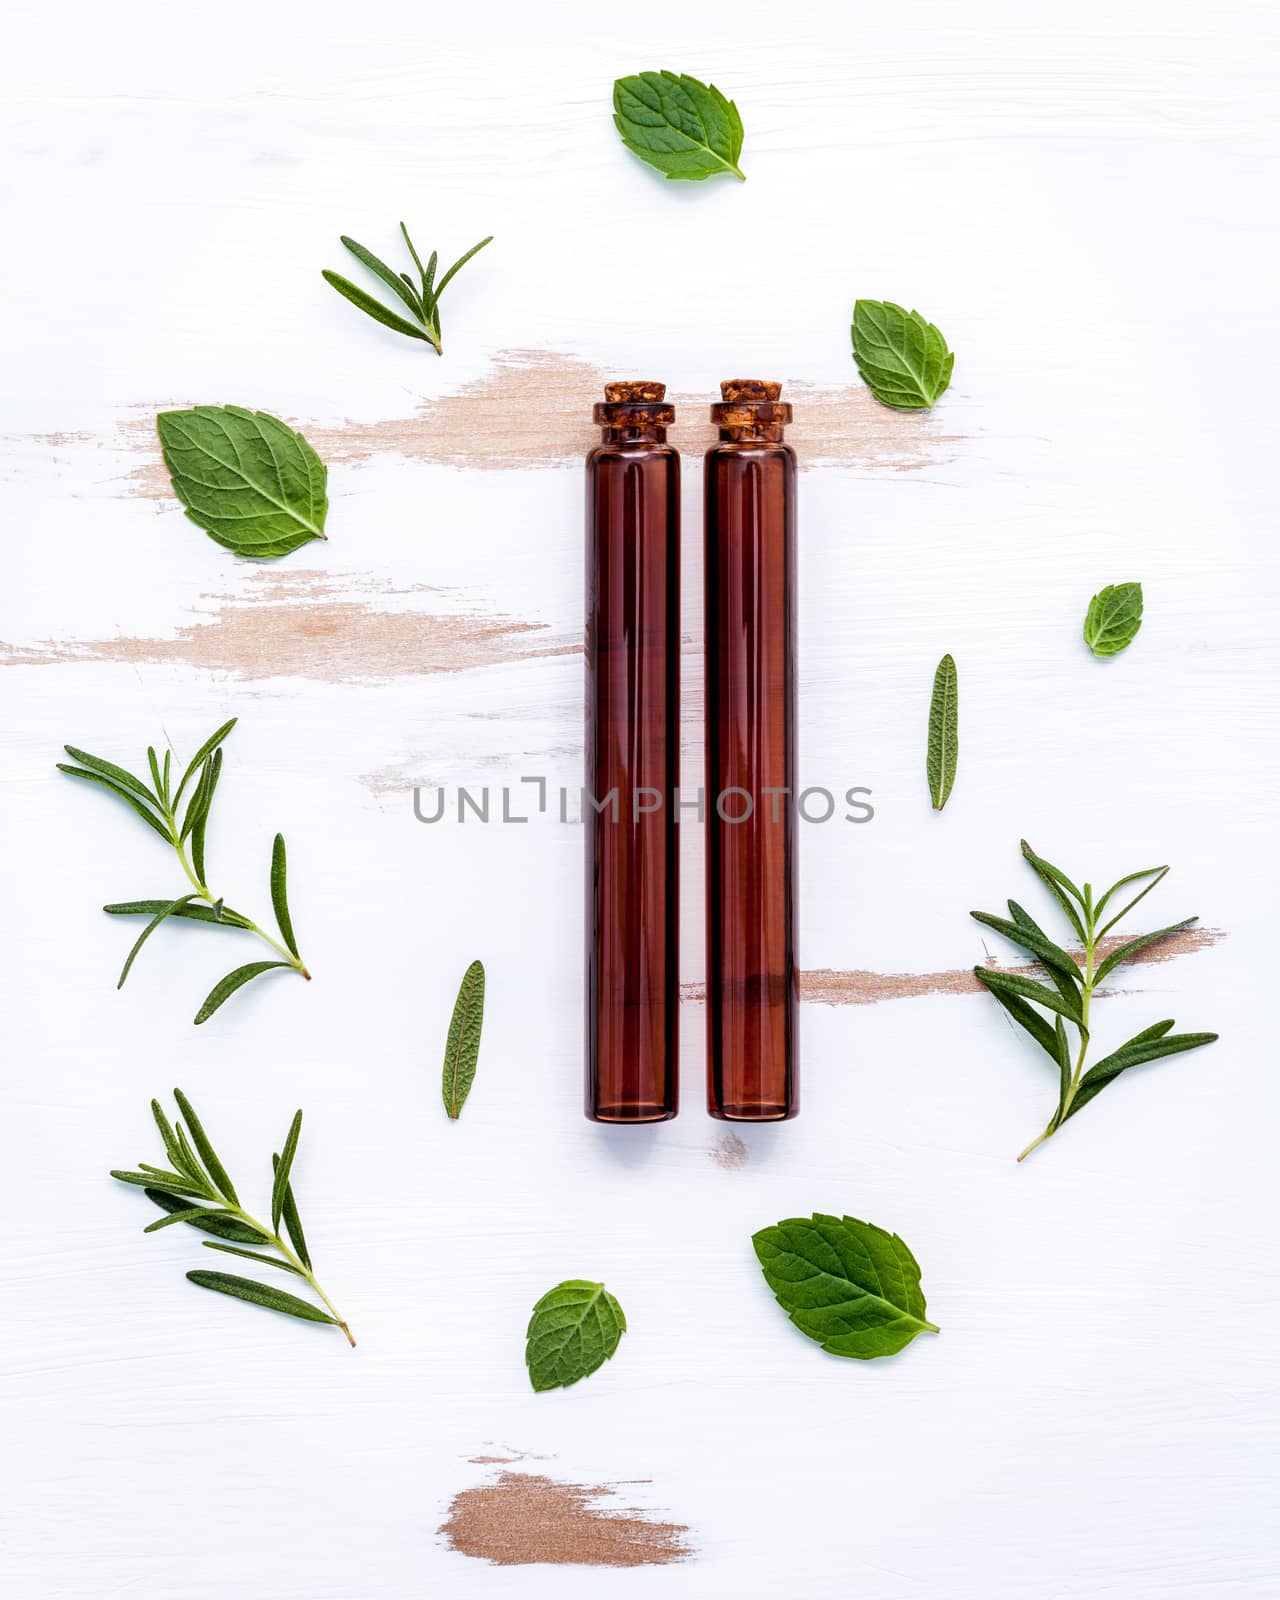 Bottle of essential oil with  fresh herbal  rosemary, thyme and  by kerdkanno